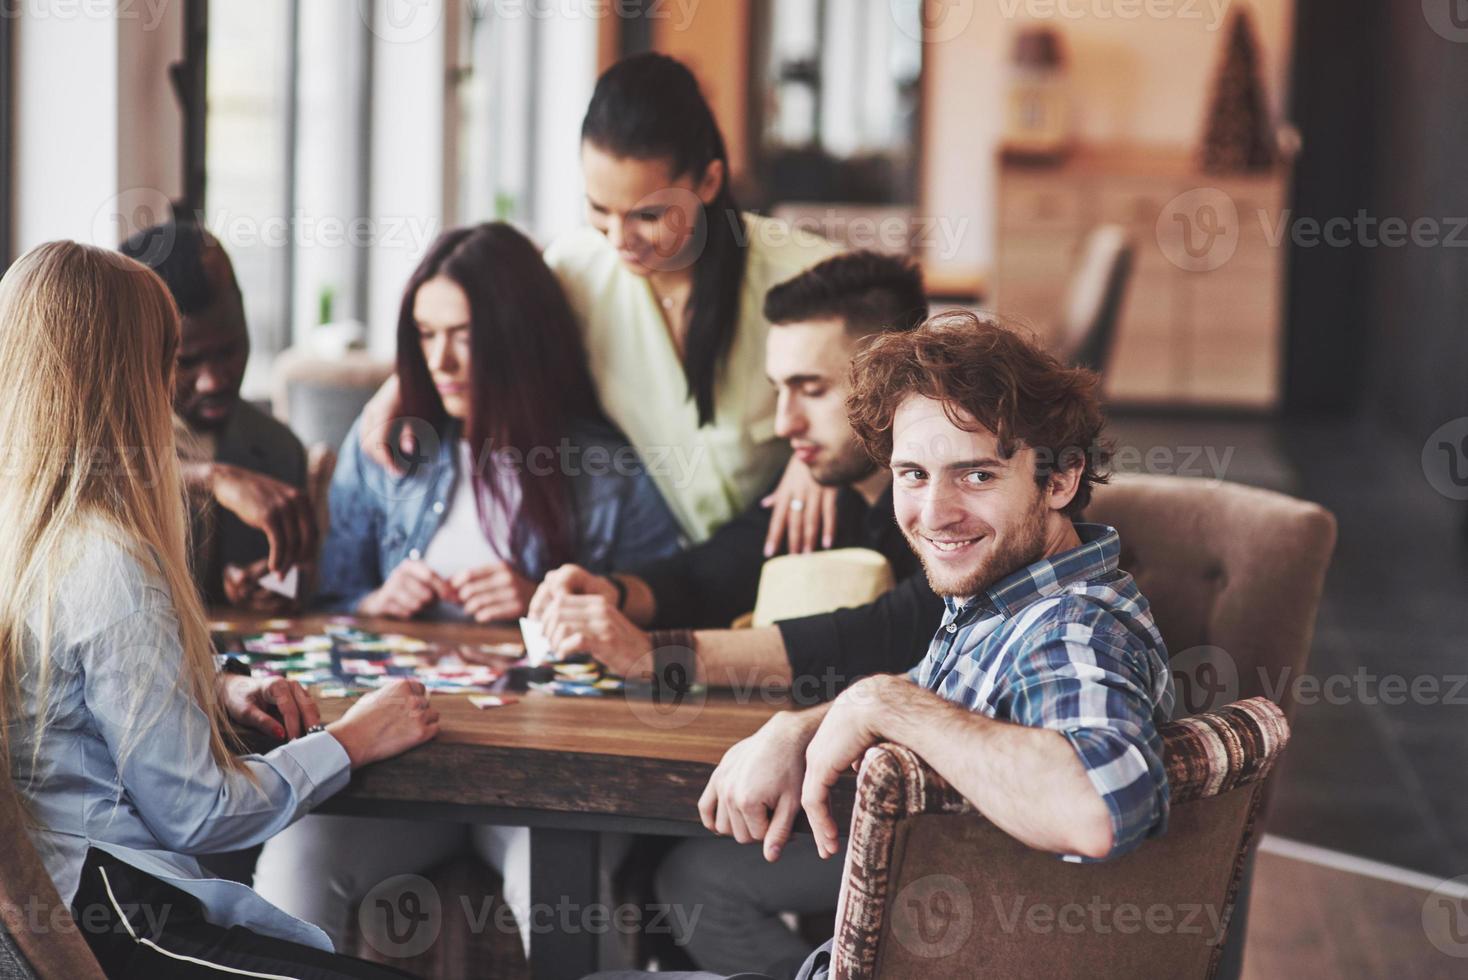 Group of creative multietnic friends sitting at wooden table. People having fun while playing board game photo